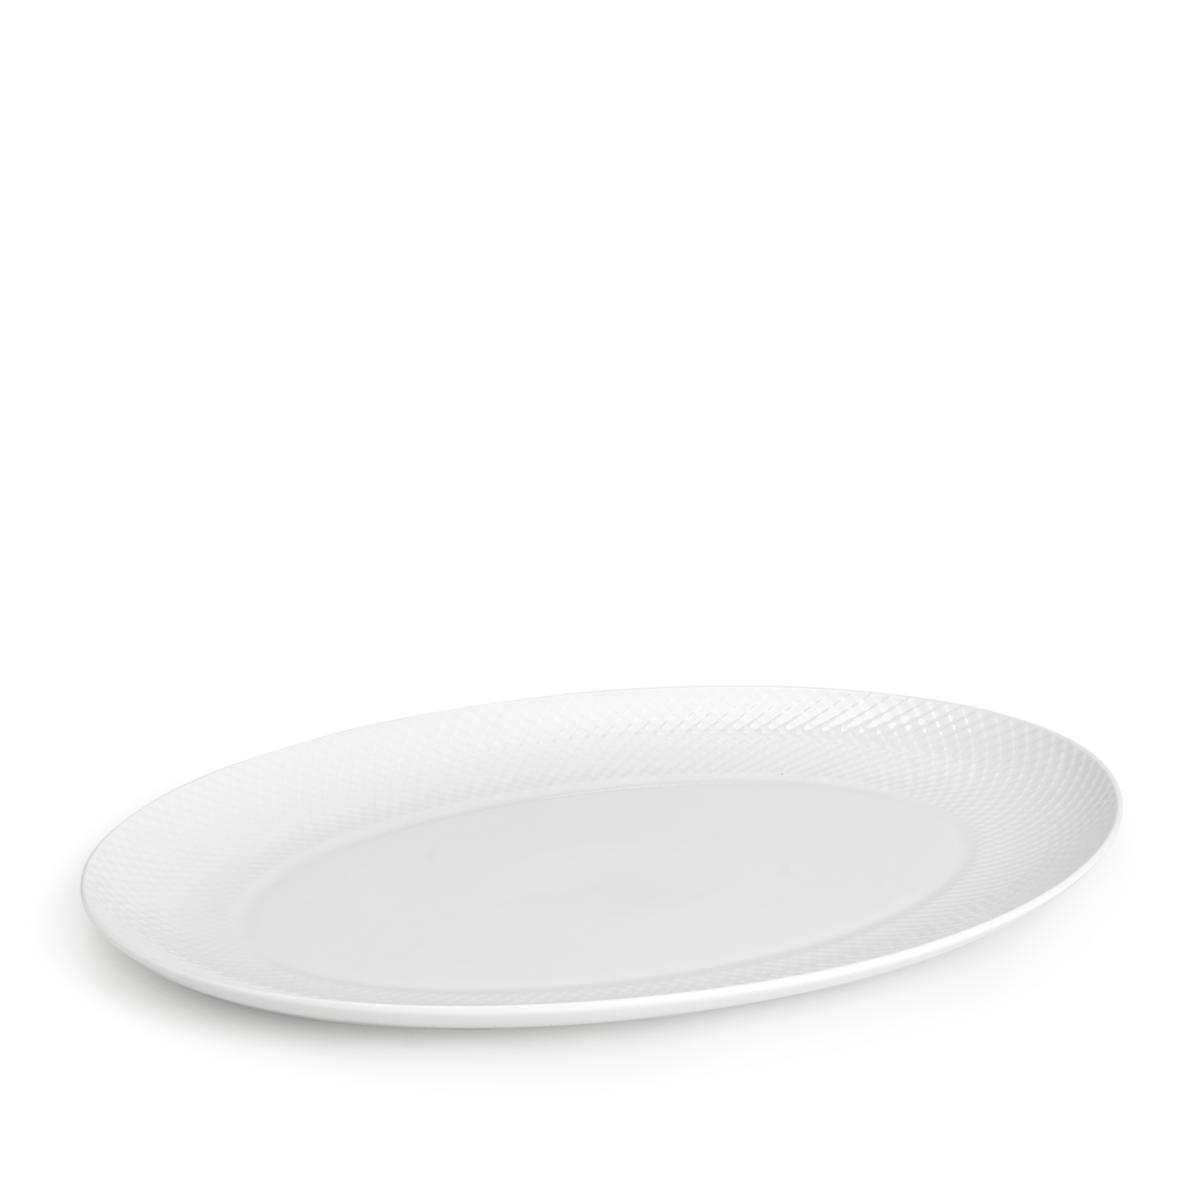 Lyngby Rhombe Serving Plate Oval White, 42 cm